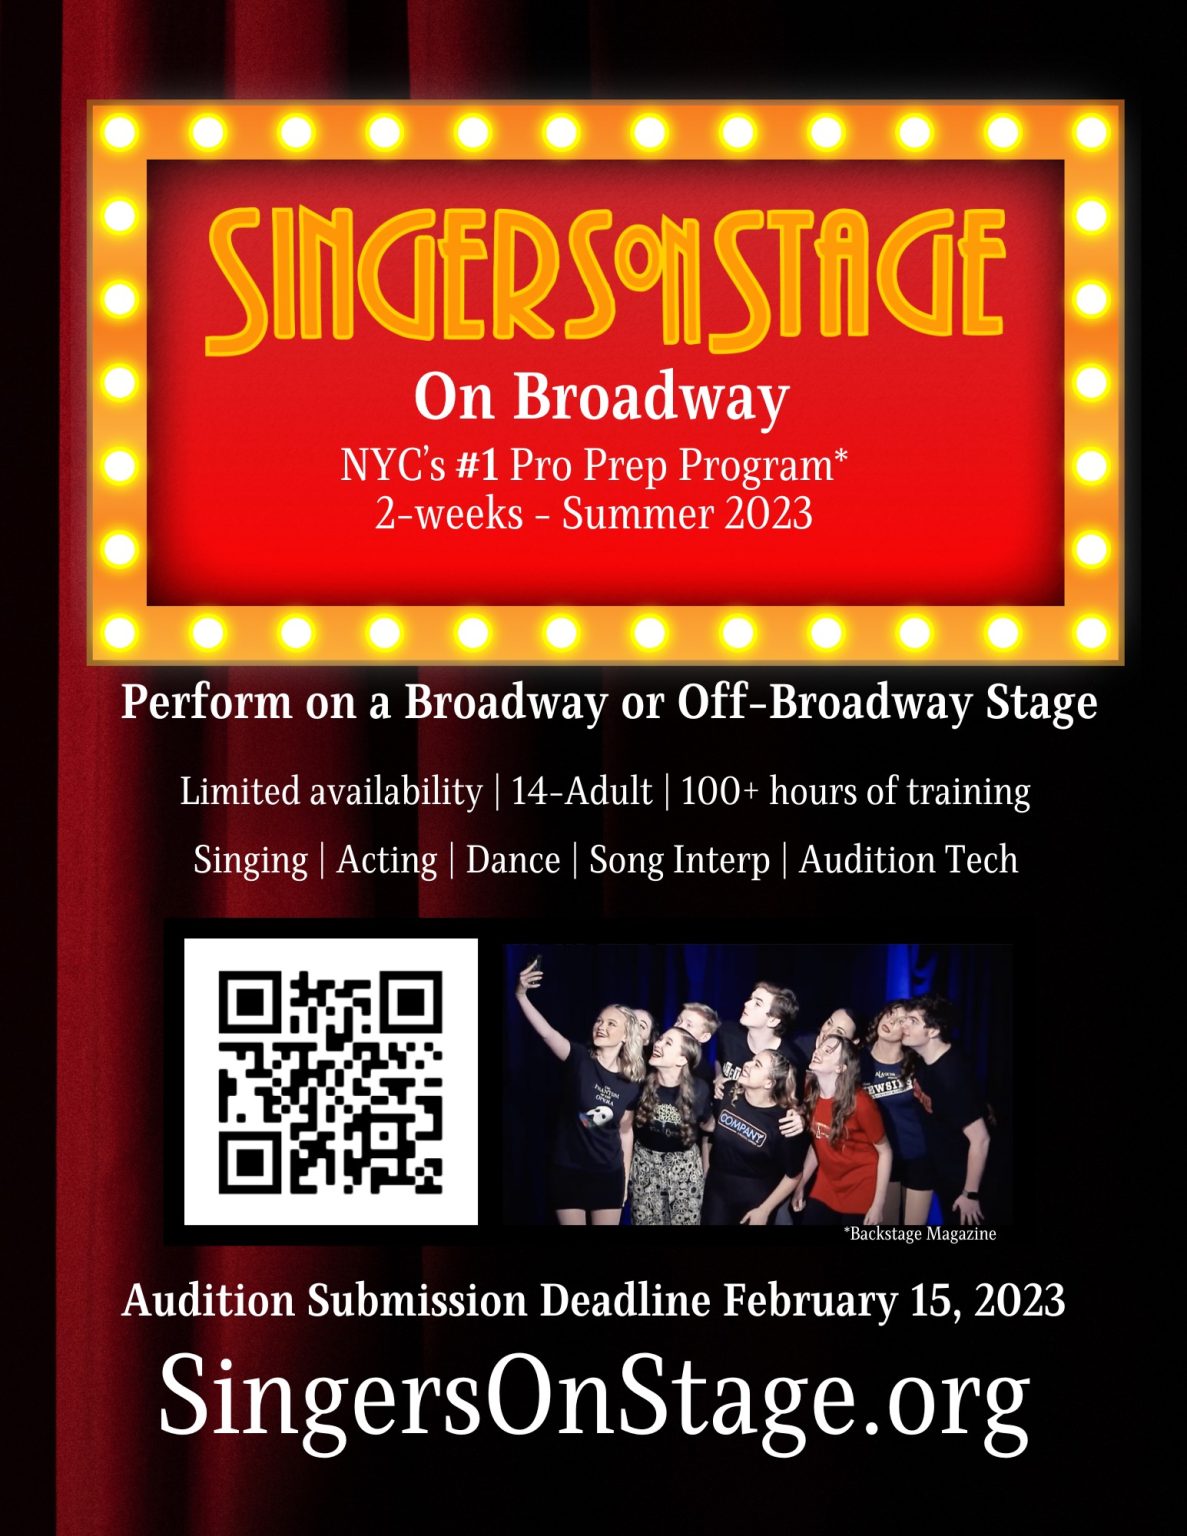 Singers on Stage on Broadway flyer 2023